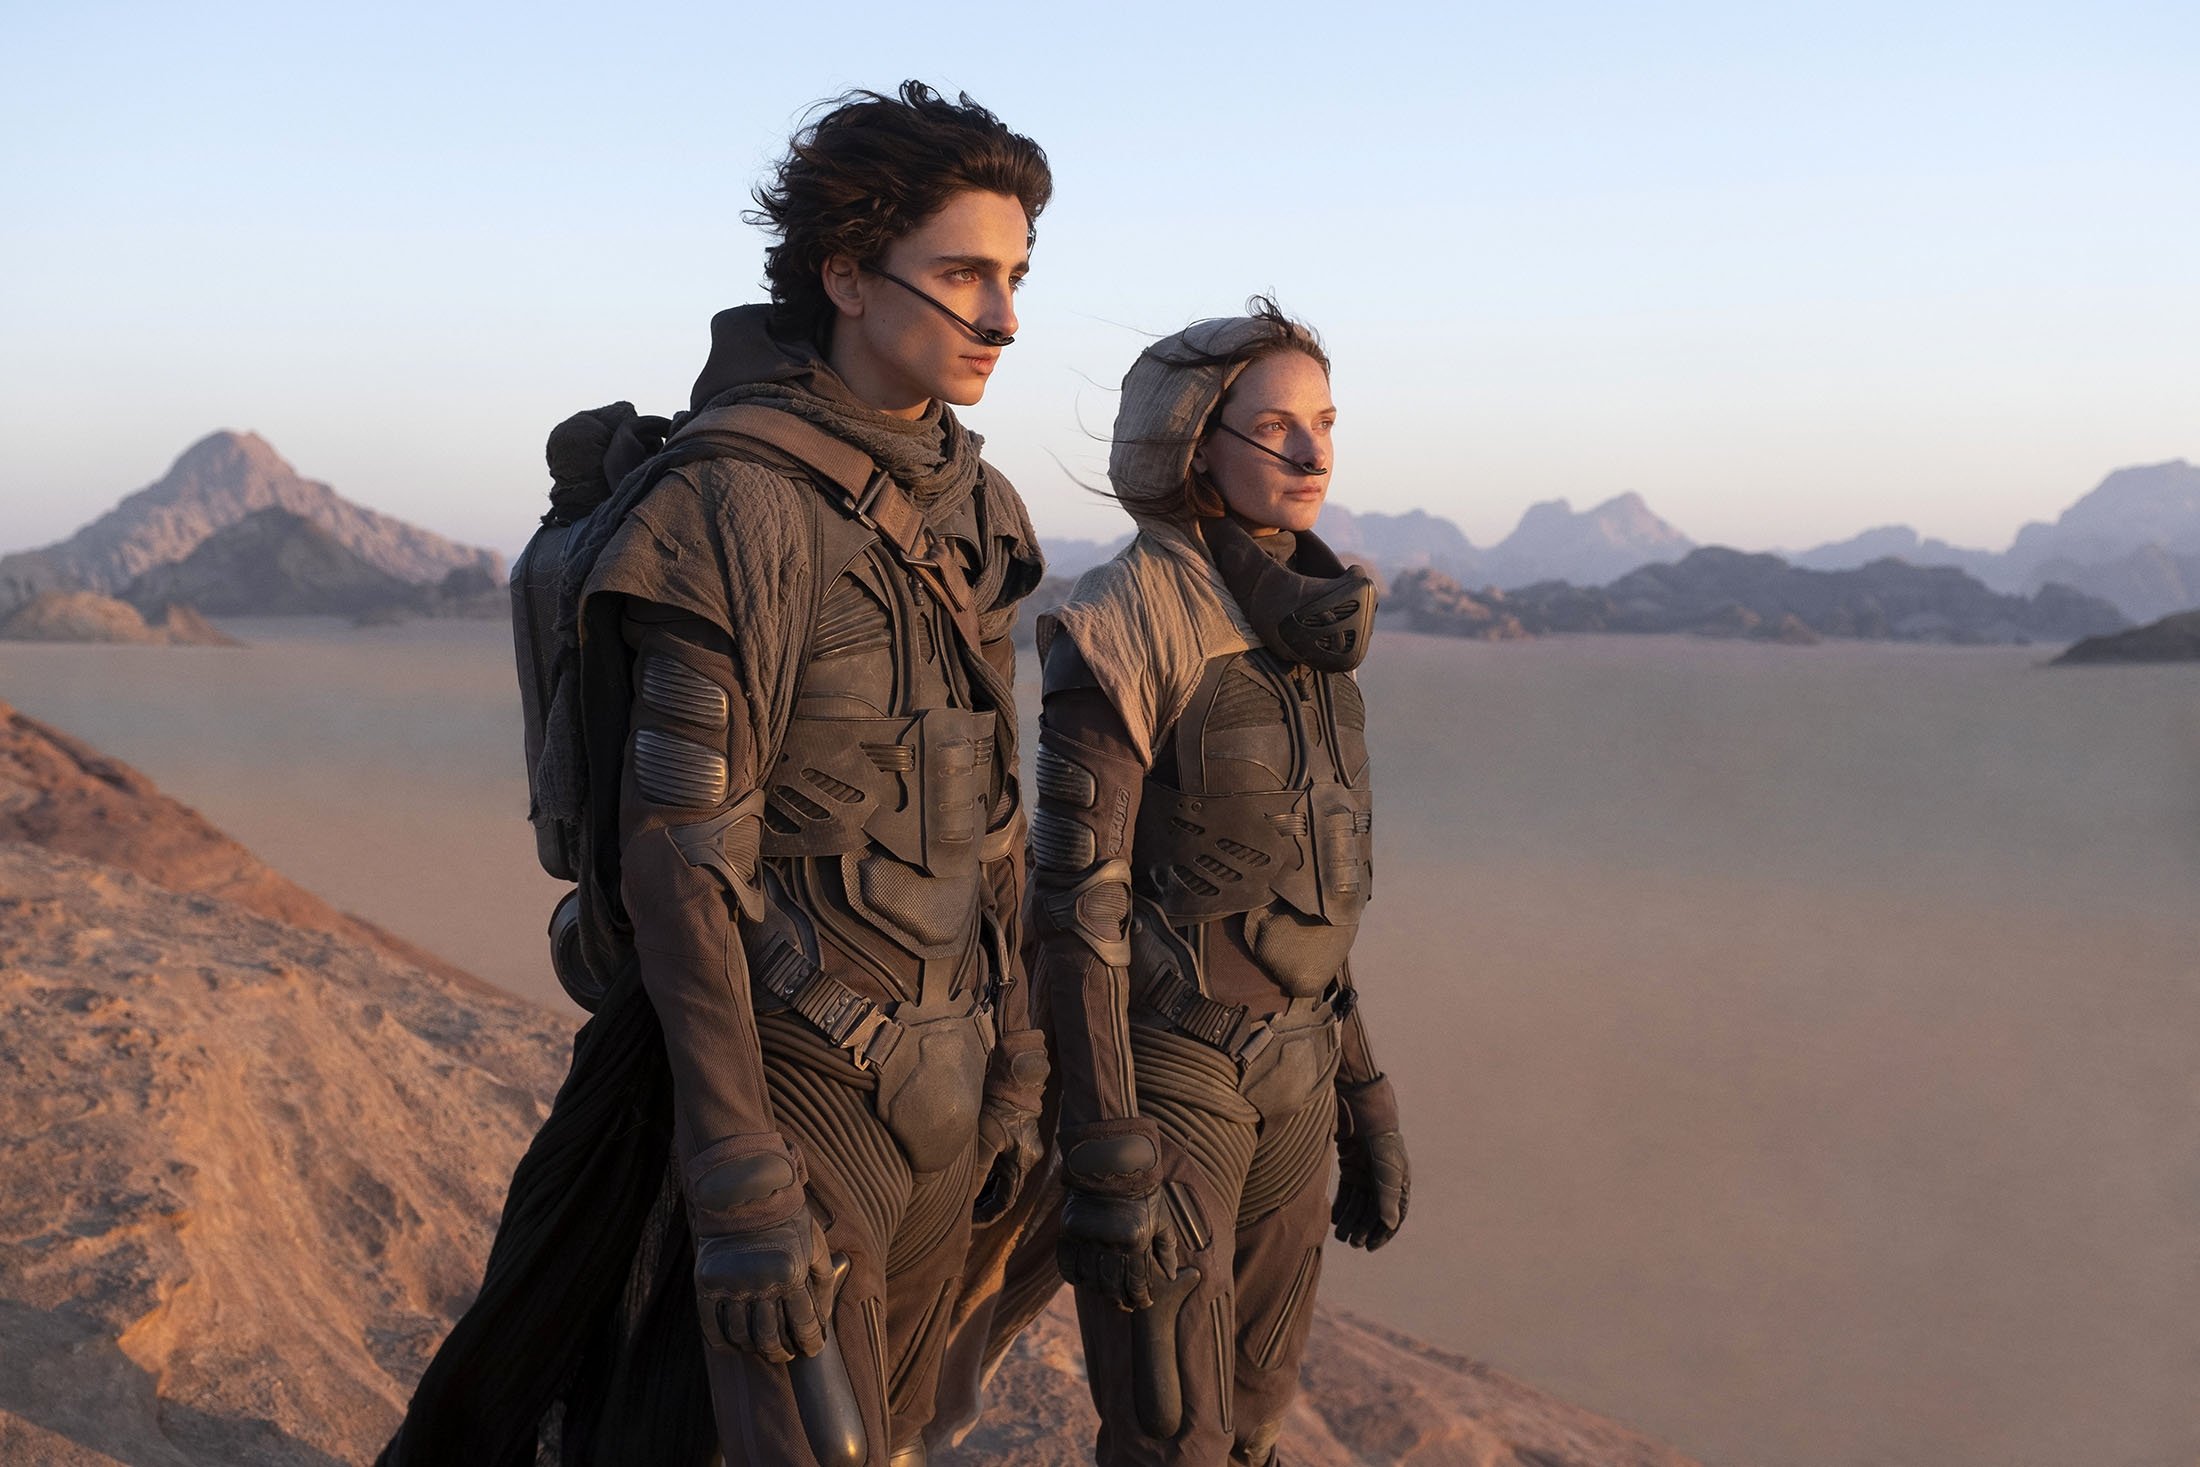 Timothee Chalamet (L) and Rebecca Ferguson, in a scene from the film "Dune." (Warner Bros. Pictures via AP)